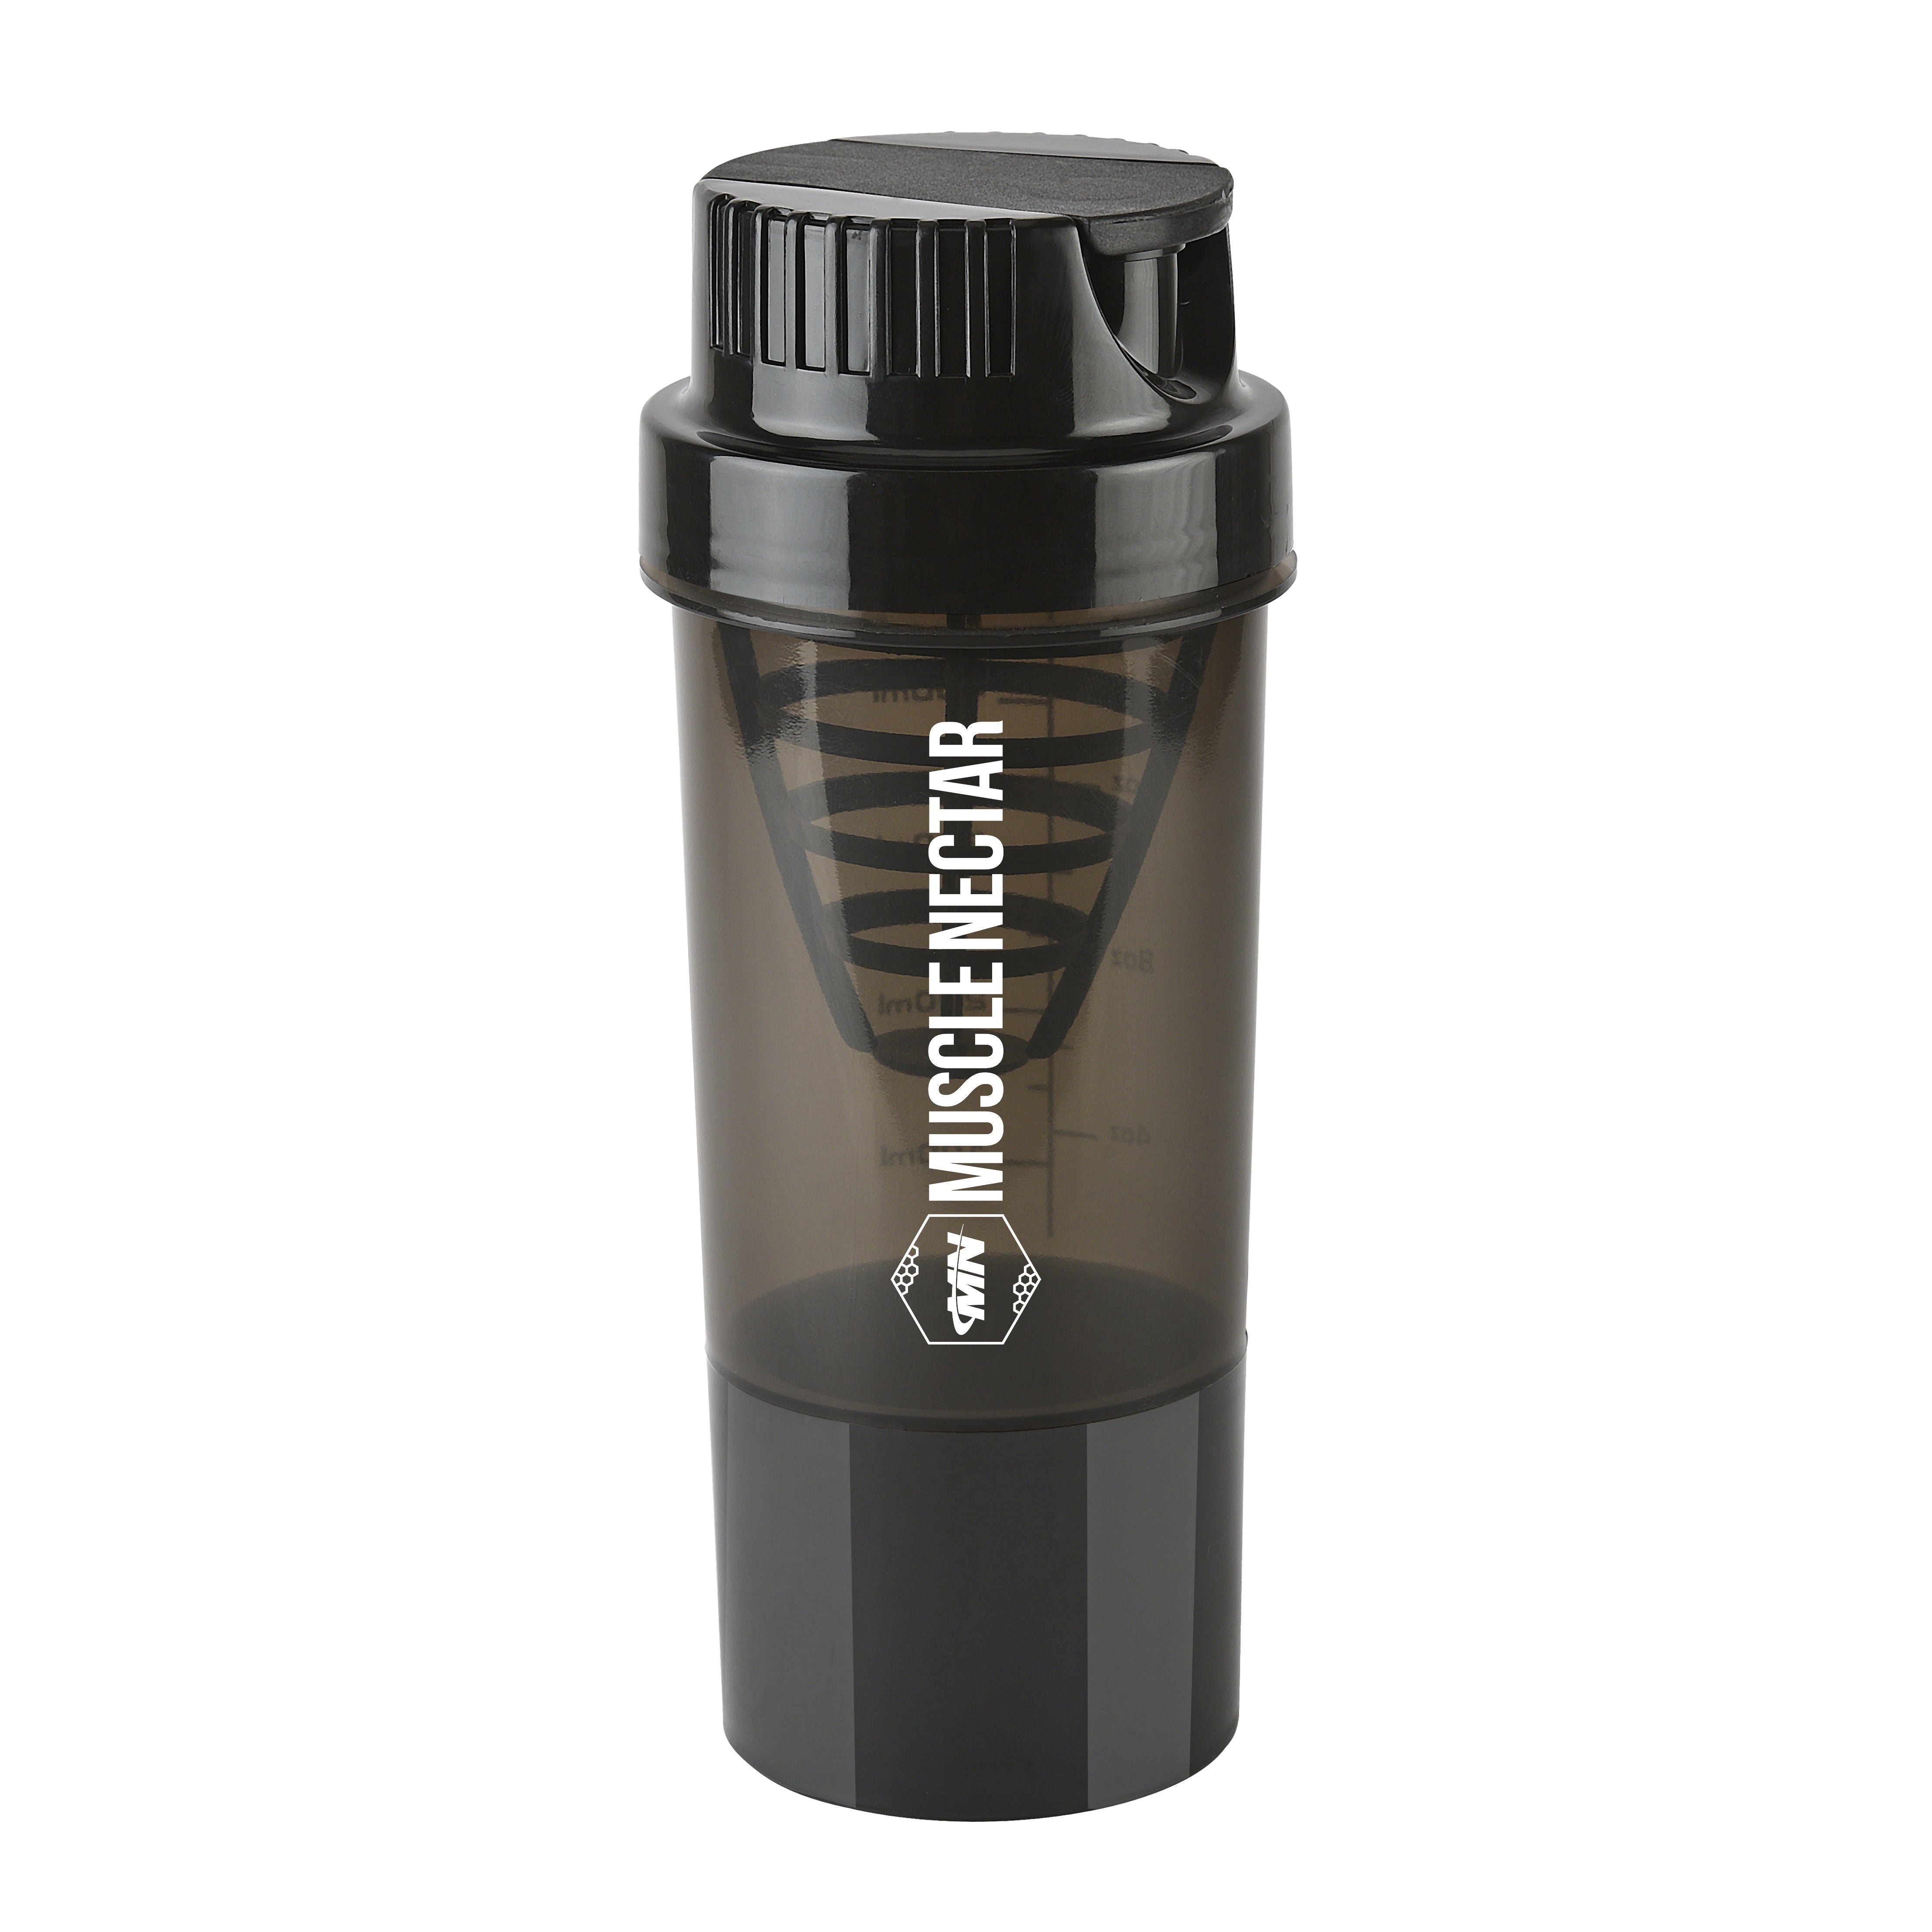 https://cdn.shopify.com/s/files/1/0503/7844/0897/products/Muscle-Nectar-Gym-Shaker-Pro-500ml-1.jpg?v=1655215981&width=4436